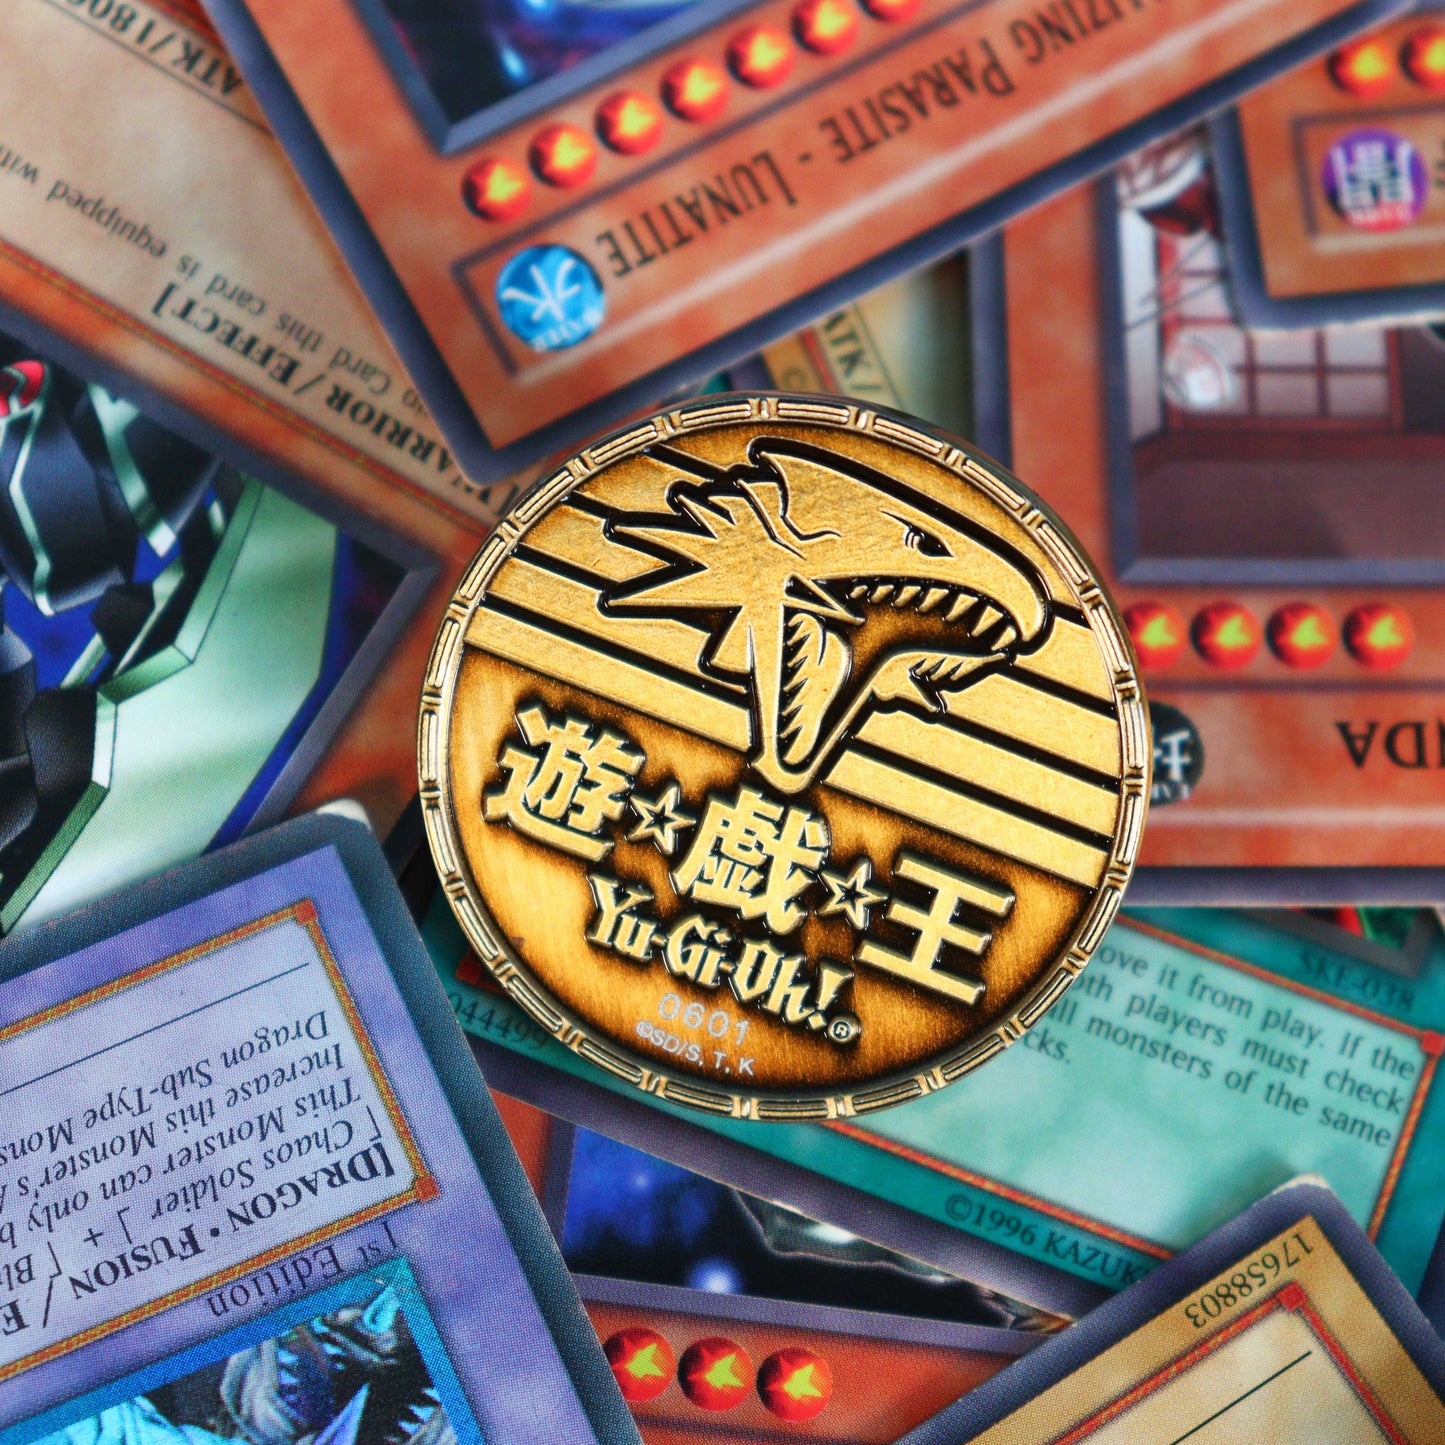 Yu-Gi-Oh! Limited Edition King of Games Collectible Coin